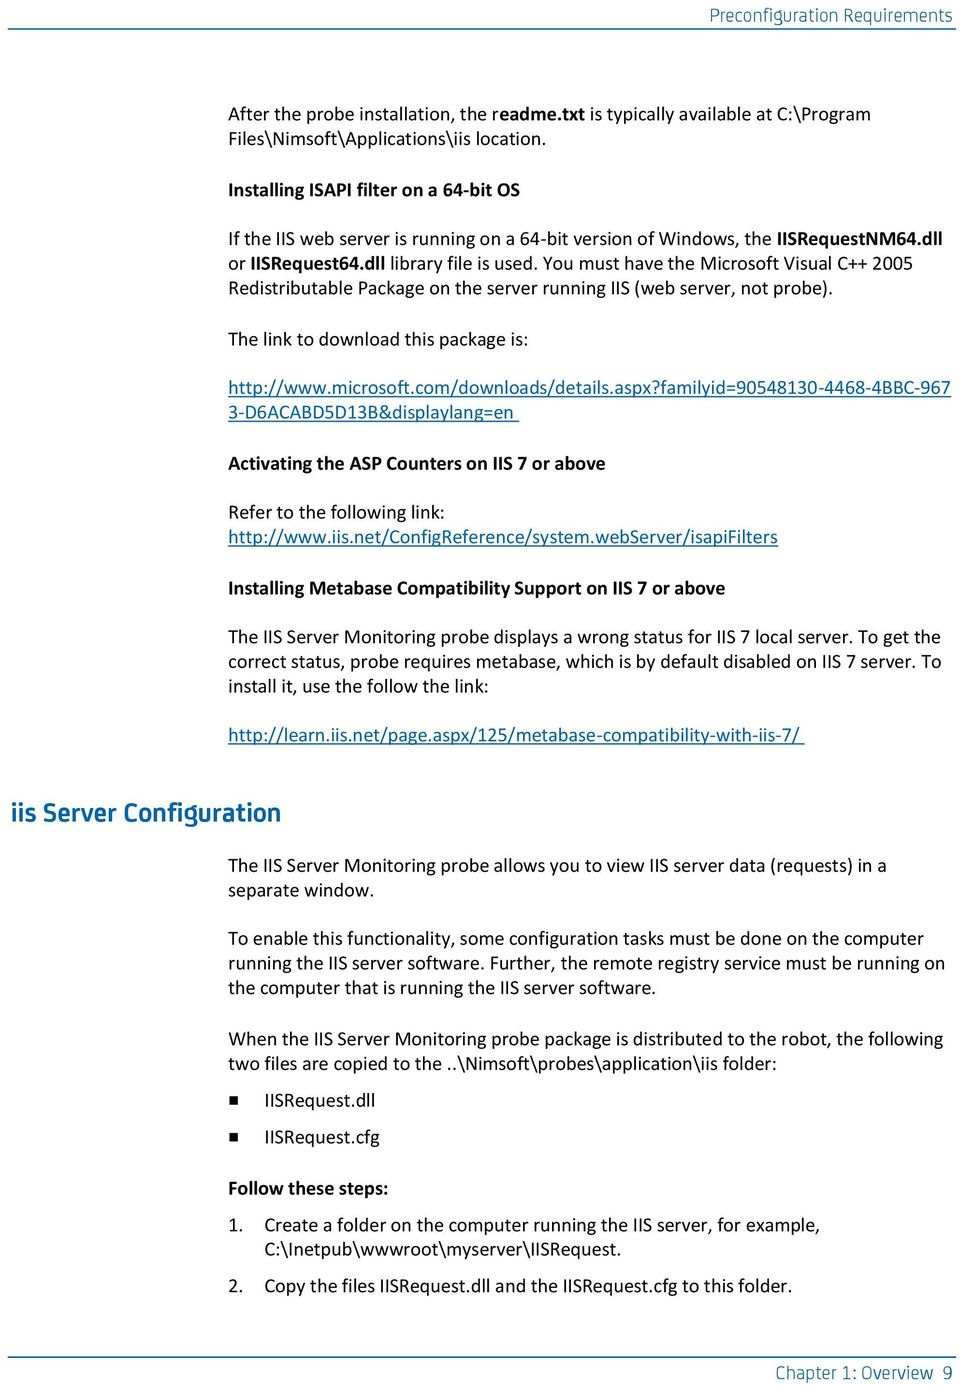 You must have the Microsoft Visual C++ 2005 Redistributable Package on the server running IIS (web server, not probe). The link to download this package is: http://www.microsoft.com/downloads/details.